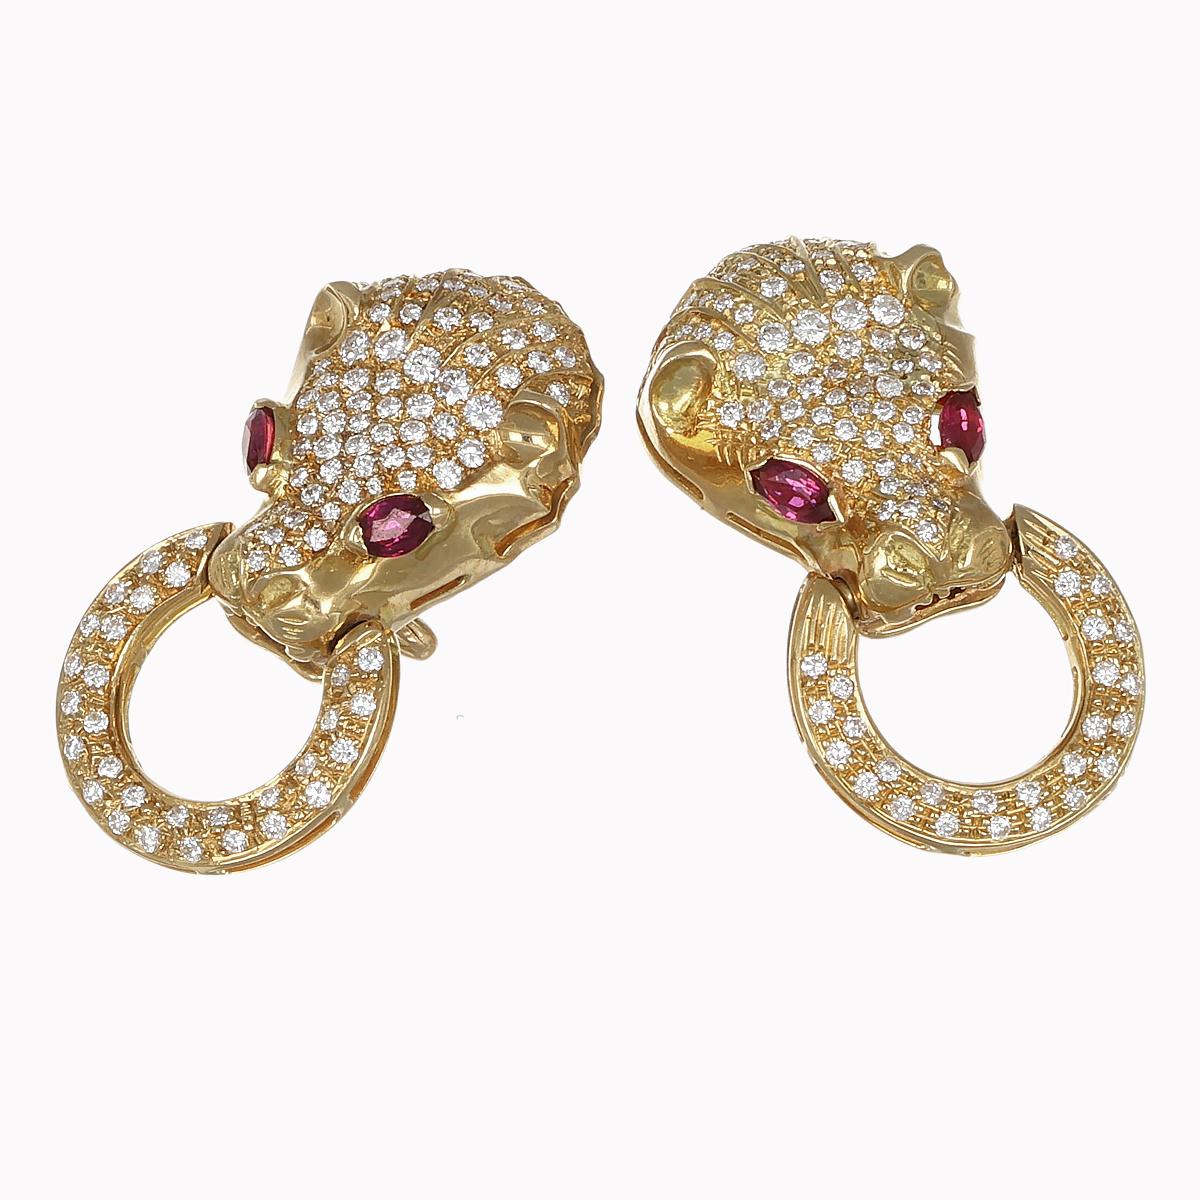 AIG Panther Parure Diamonds 5.79 Ct Marquise Rubies 2 Ct 18Kt Gold Set 3 Pieces For Sale 3